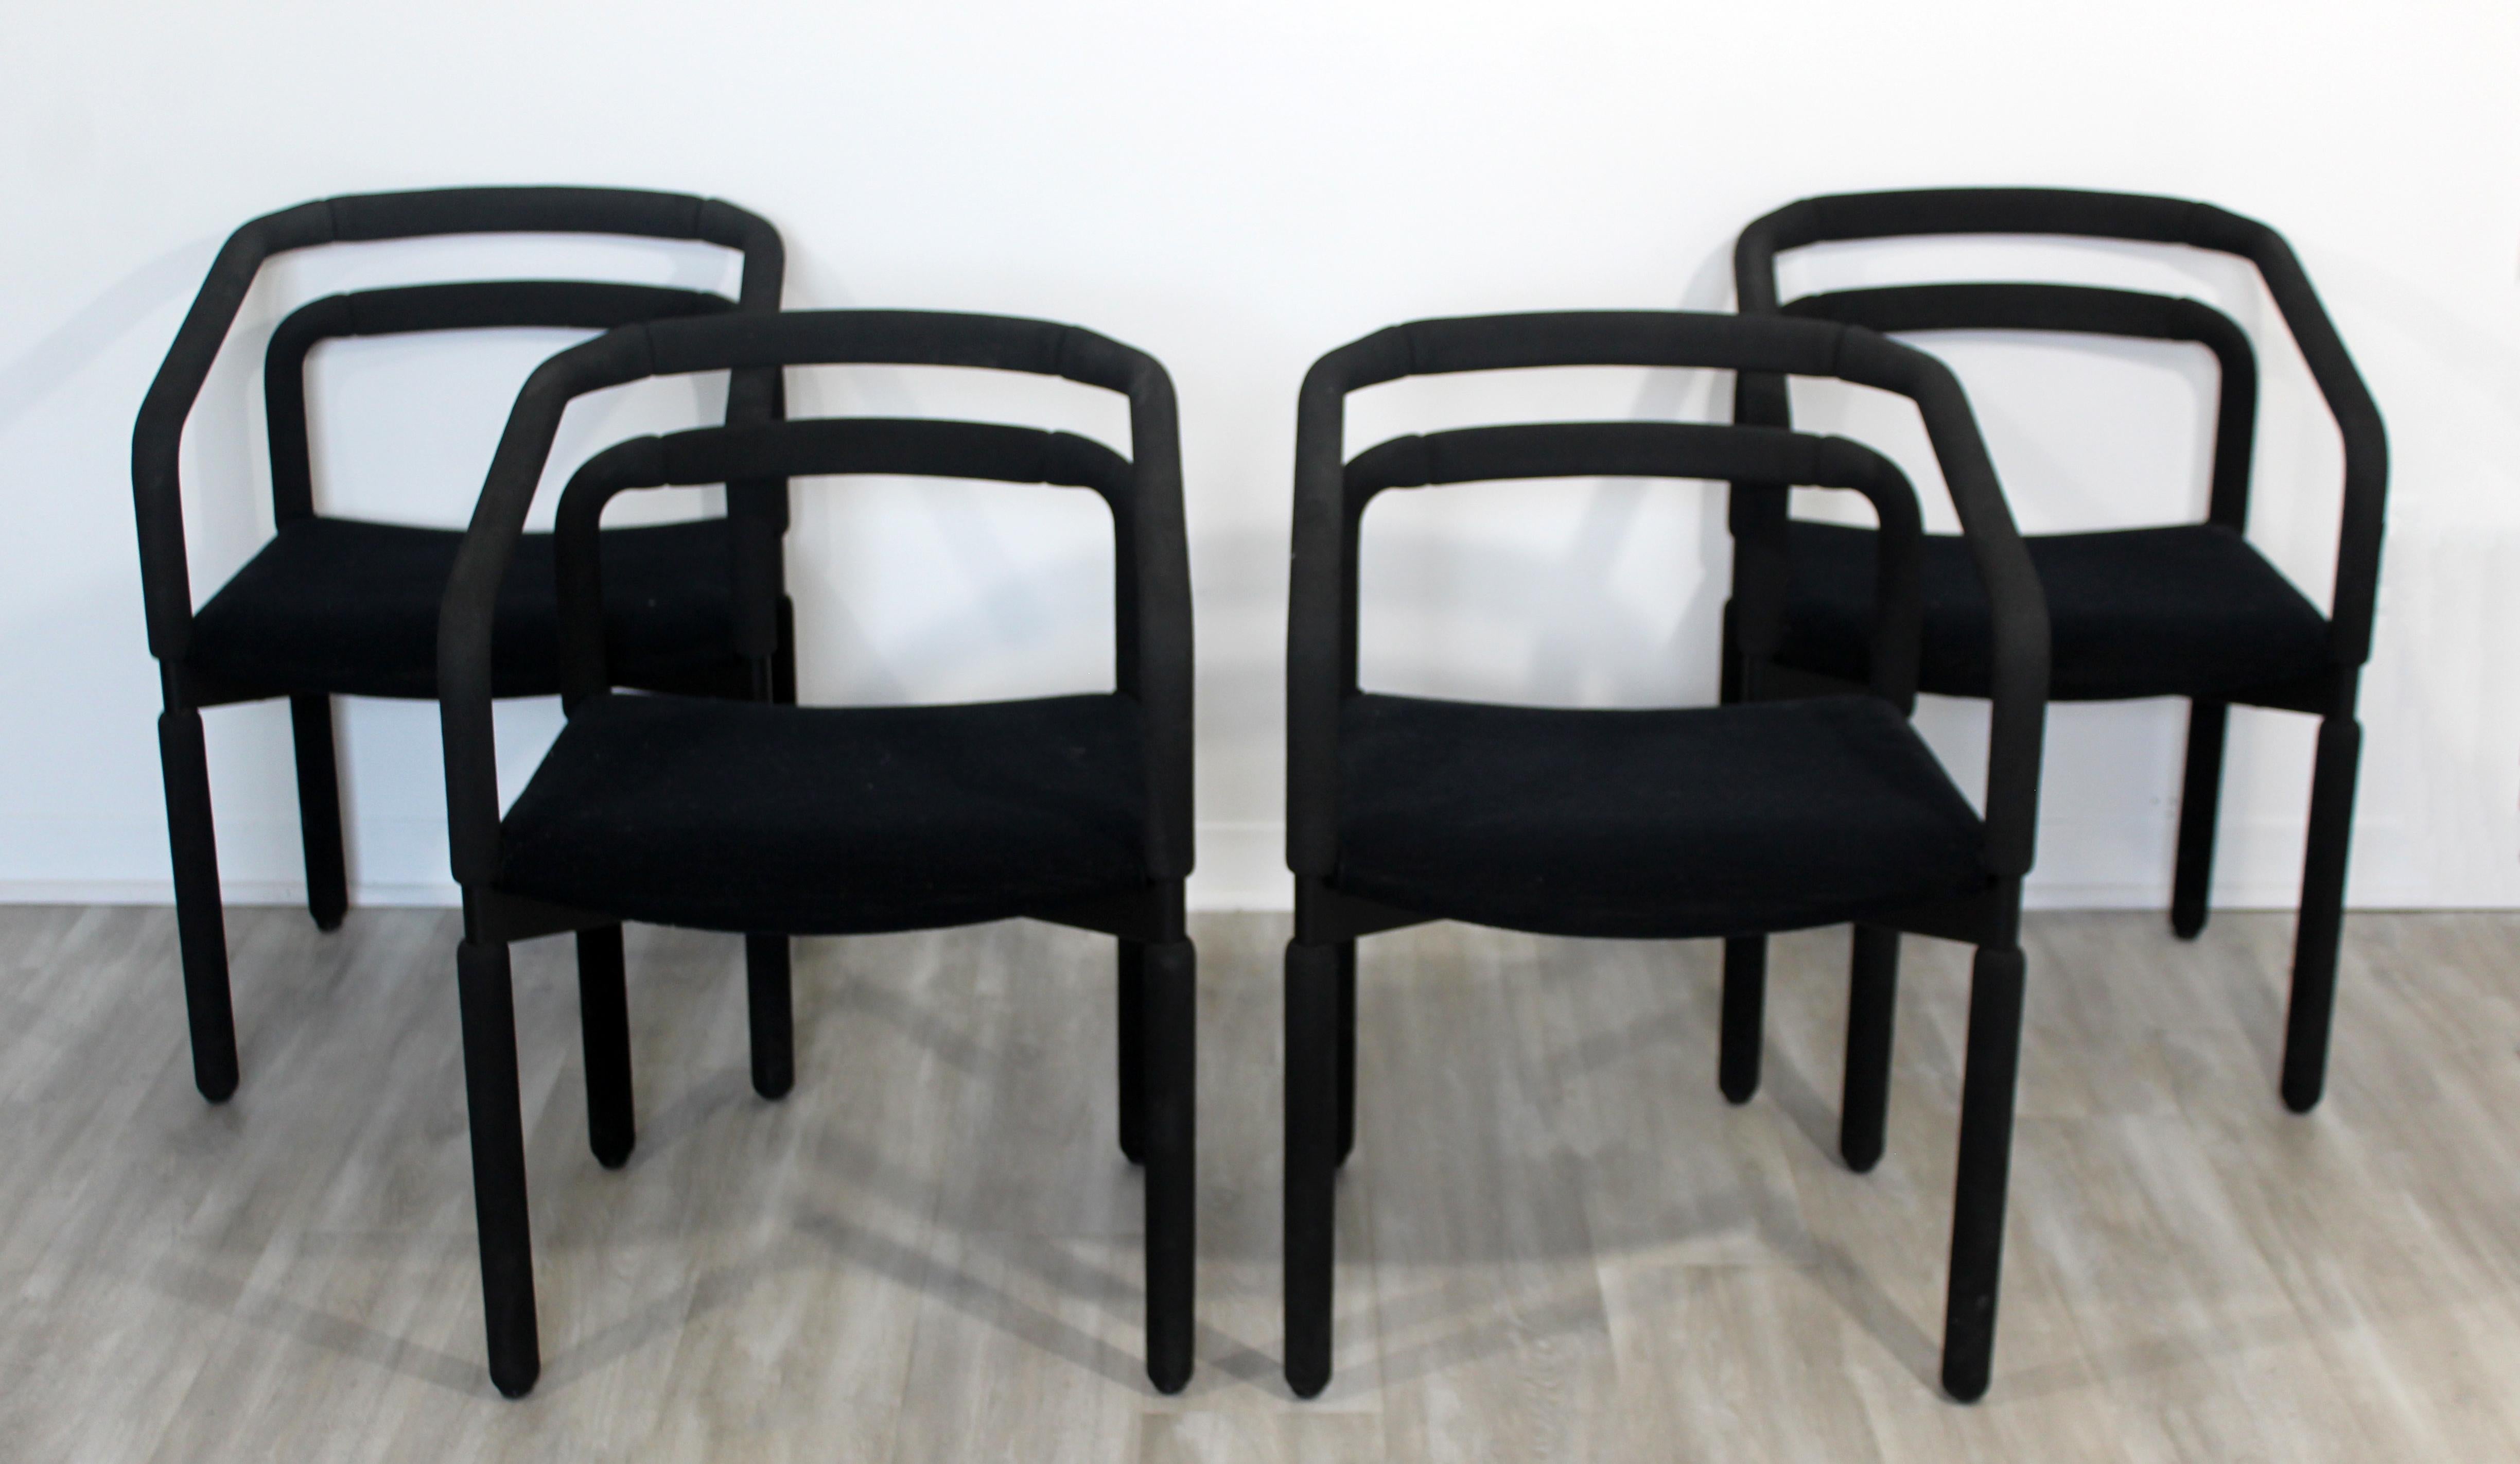 For your consideration is a fantastic set of four black, dining armchairs, with Knoll tags, by Metrolitan Furniture, Braemar, circa 1987. In very good vintage condition. The dimensions are 21.5